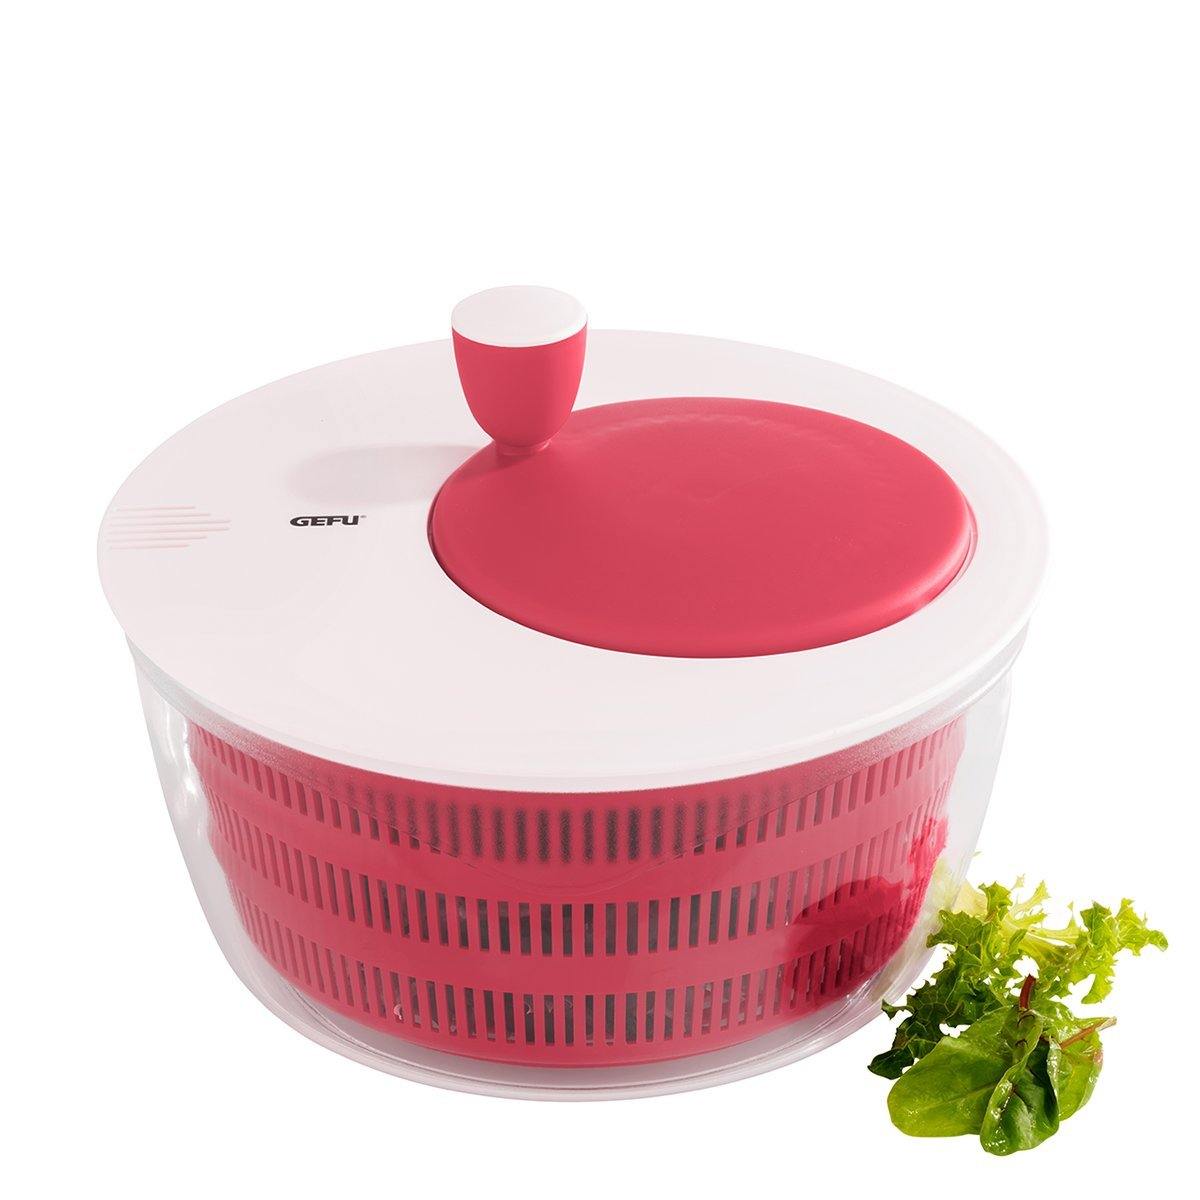 GEFU Salad Spinner Rotare, Raspberry Red - Whole and All